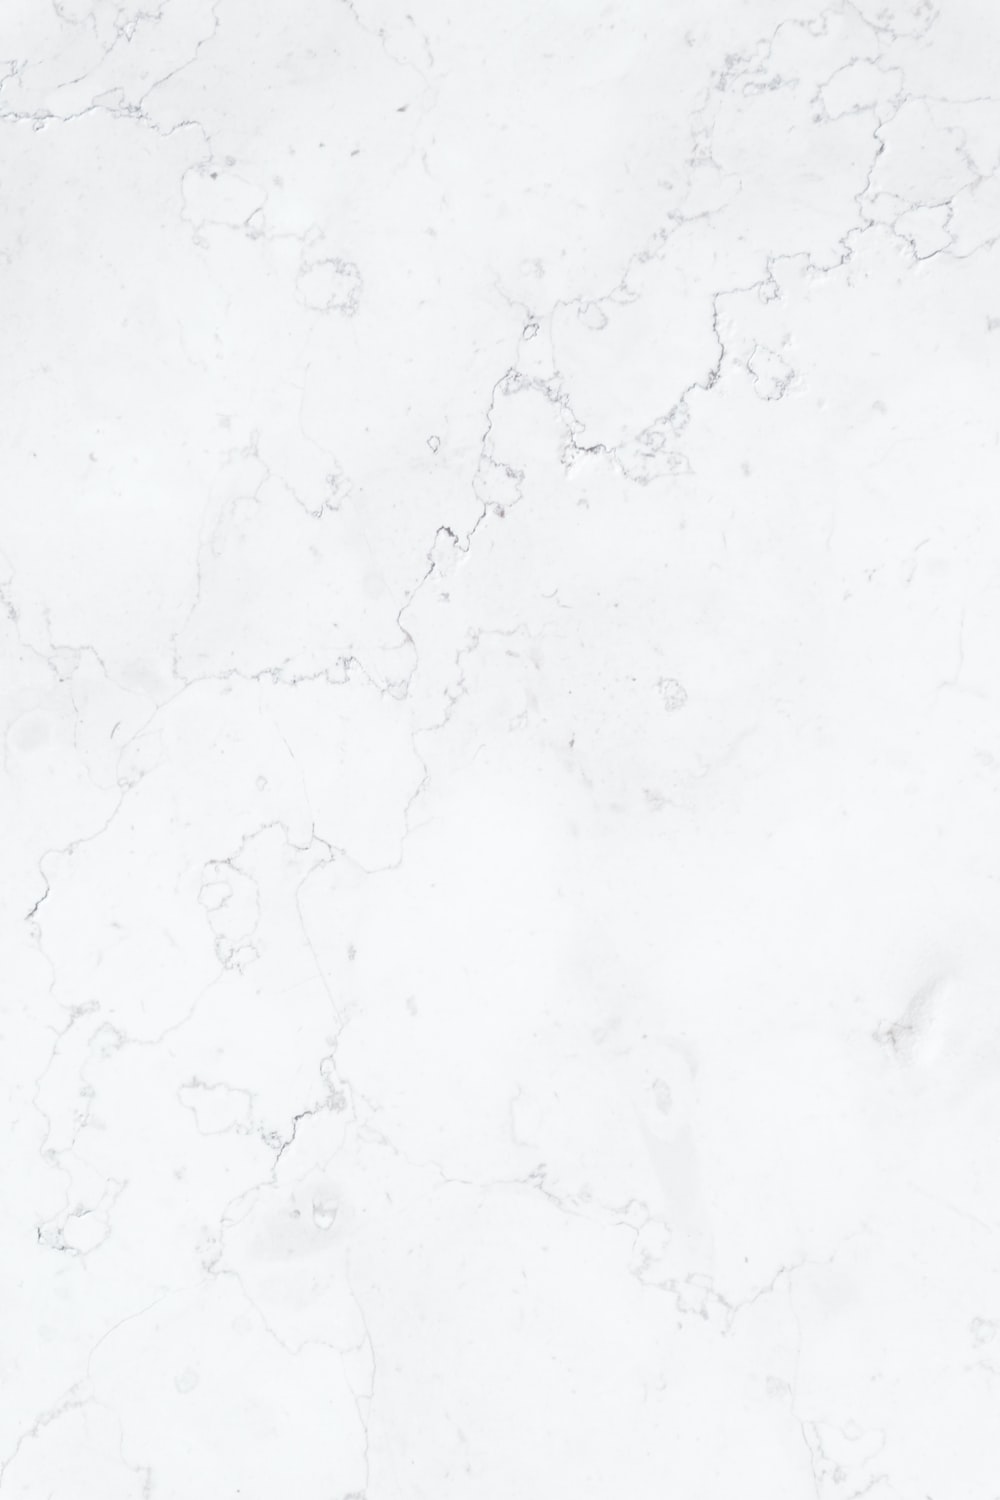 Detail White Marble Background Hd Nomer 2